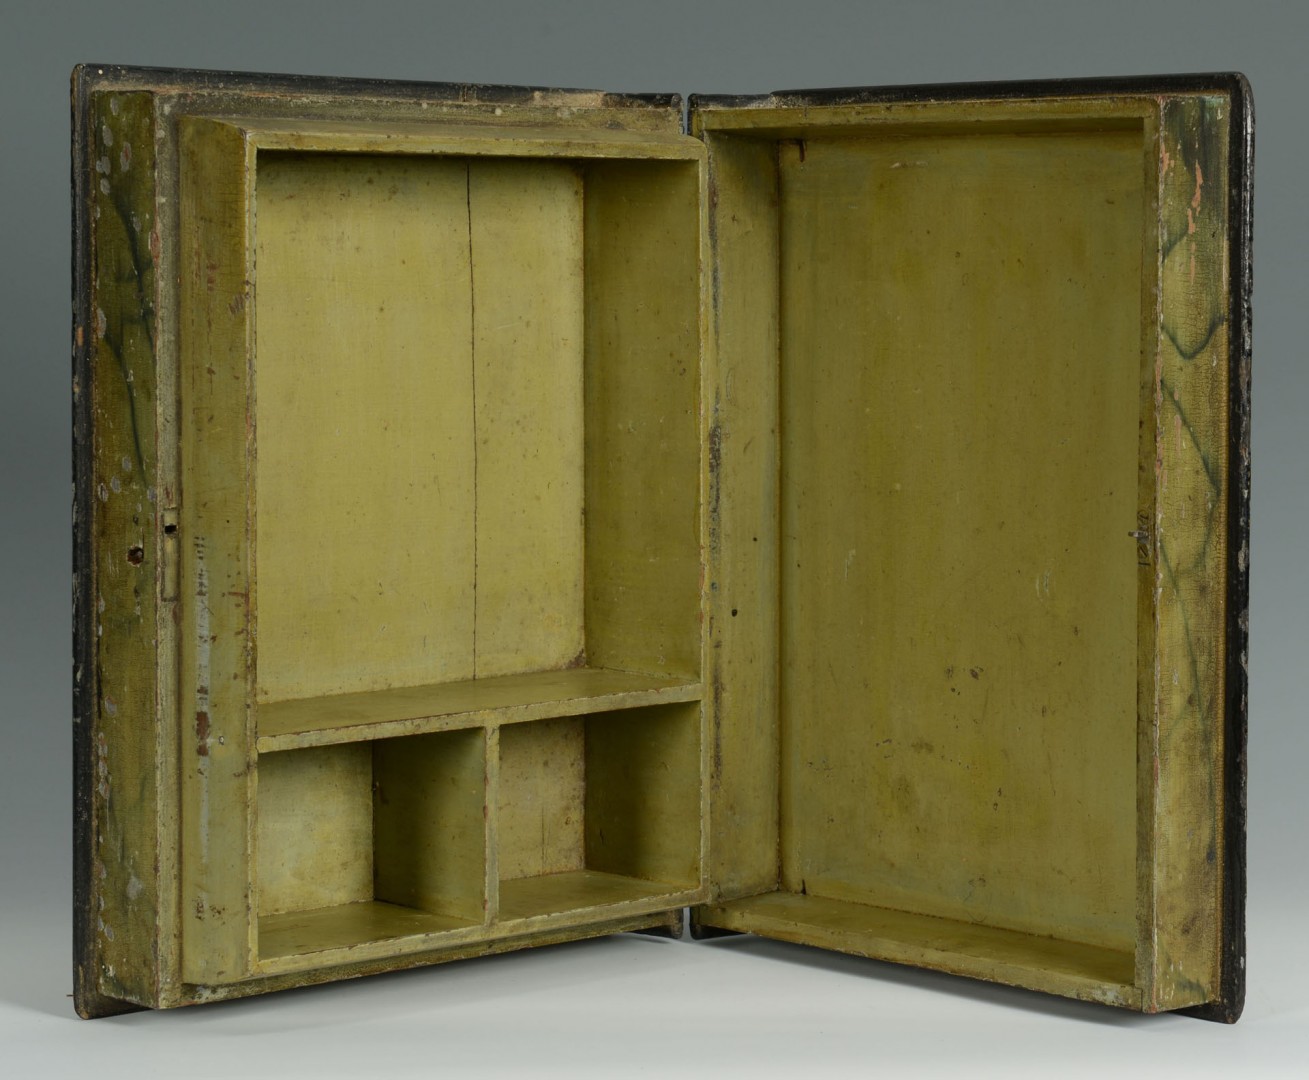 Lot 68: 2 Small Paint Decorated Document Boxes